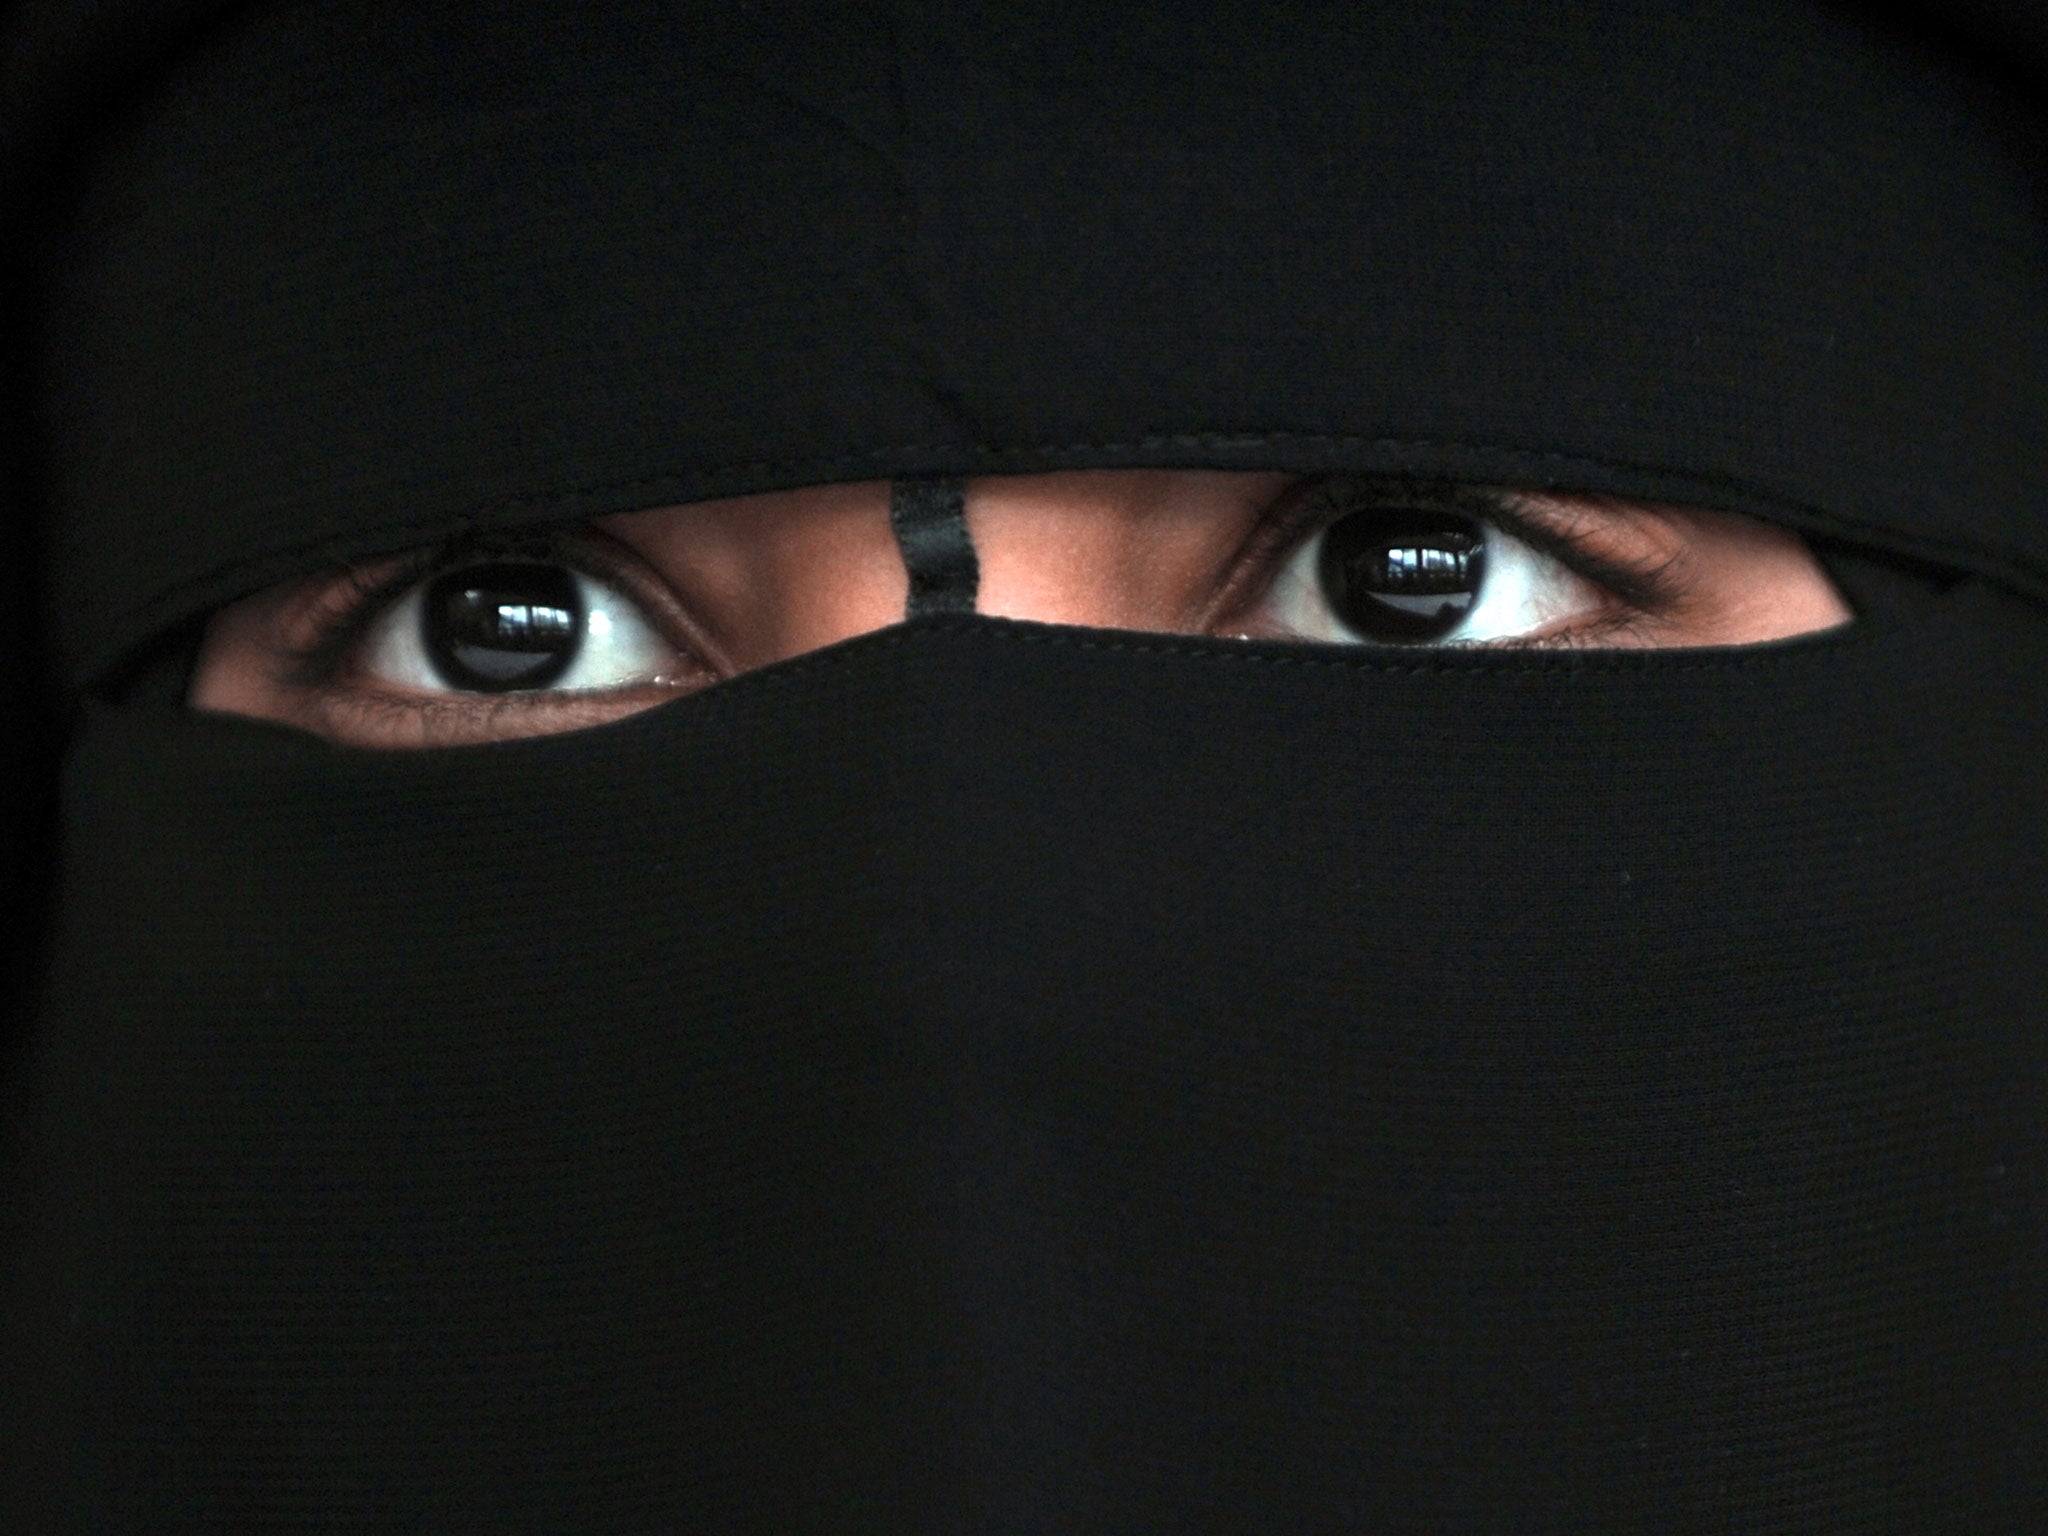 Judges must respect women to choose to cover their faces in court, a senior judge has said